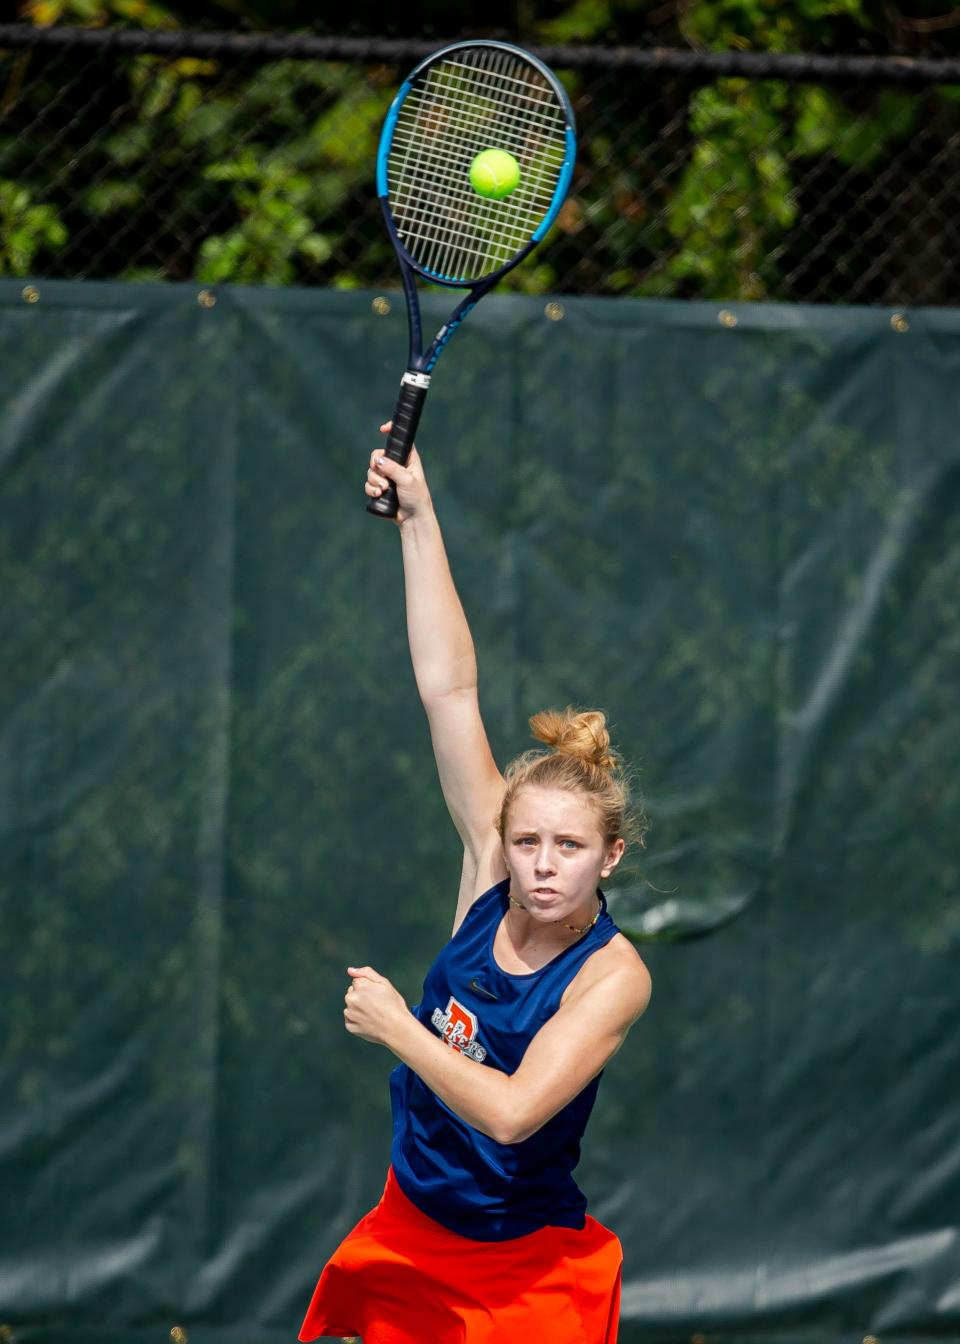 Rochester’s Julia Musgrave hits a serve in doubles play during the Girls CS8 Tennis Tournament at Washington Park in Springfield, Ill., Friday, October 8, 2021. [Justin L. Fowler/The State Journal-Register] 